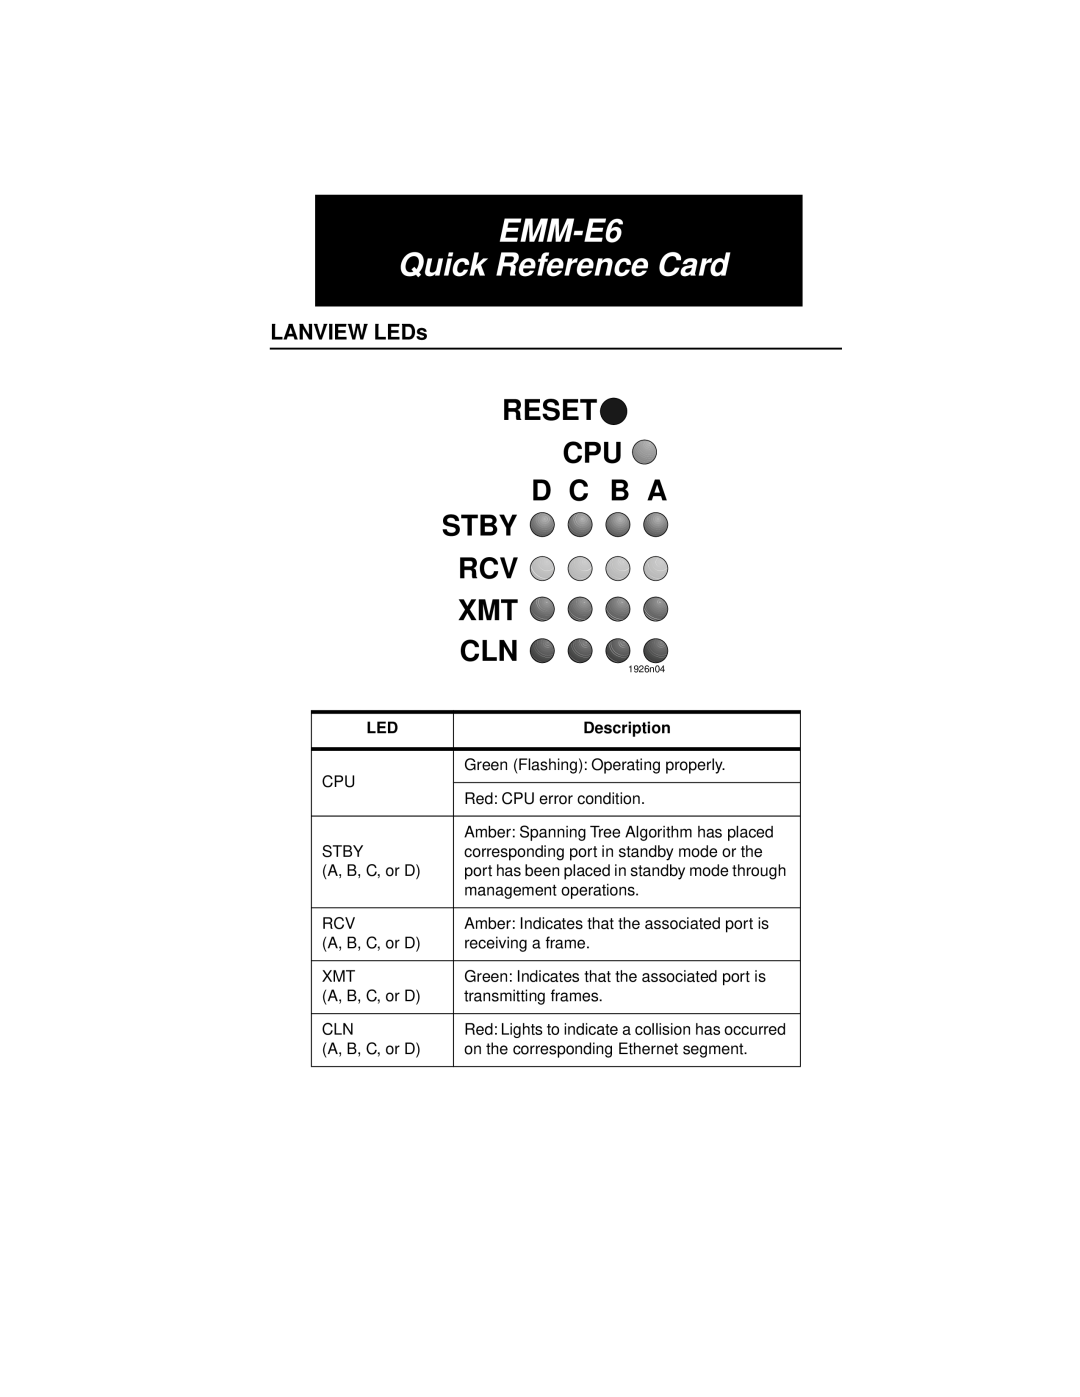 Cabletron Systems manual LANVIEW LEDs, EMM-E6 Quick Reference Card, Reset Cpu D C B A, Stby, Description 